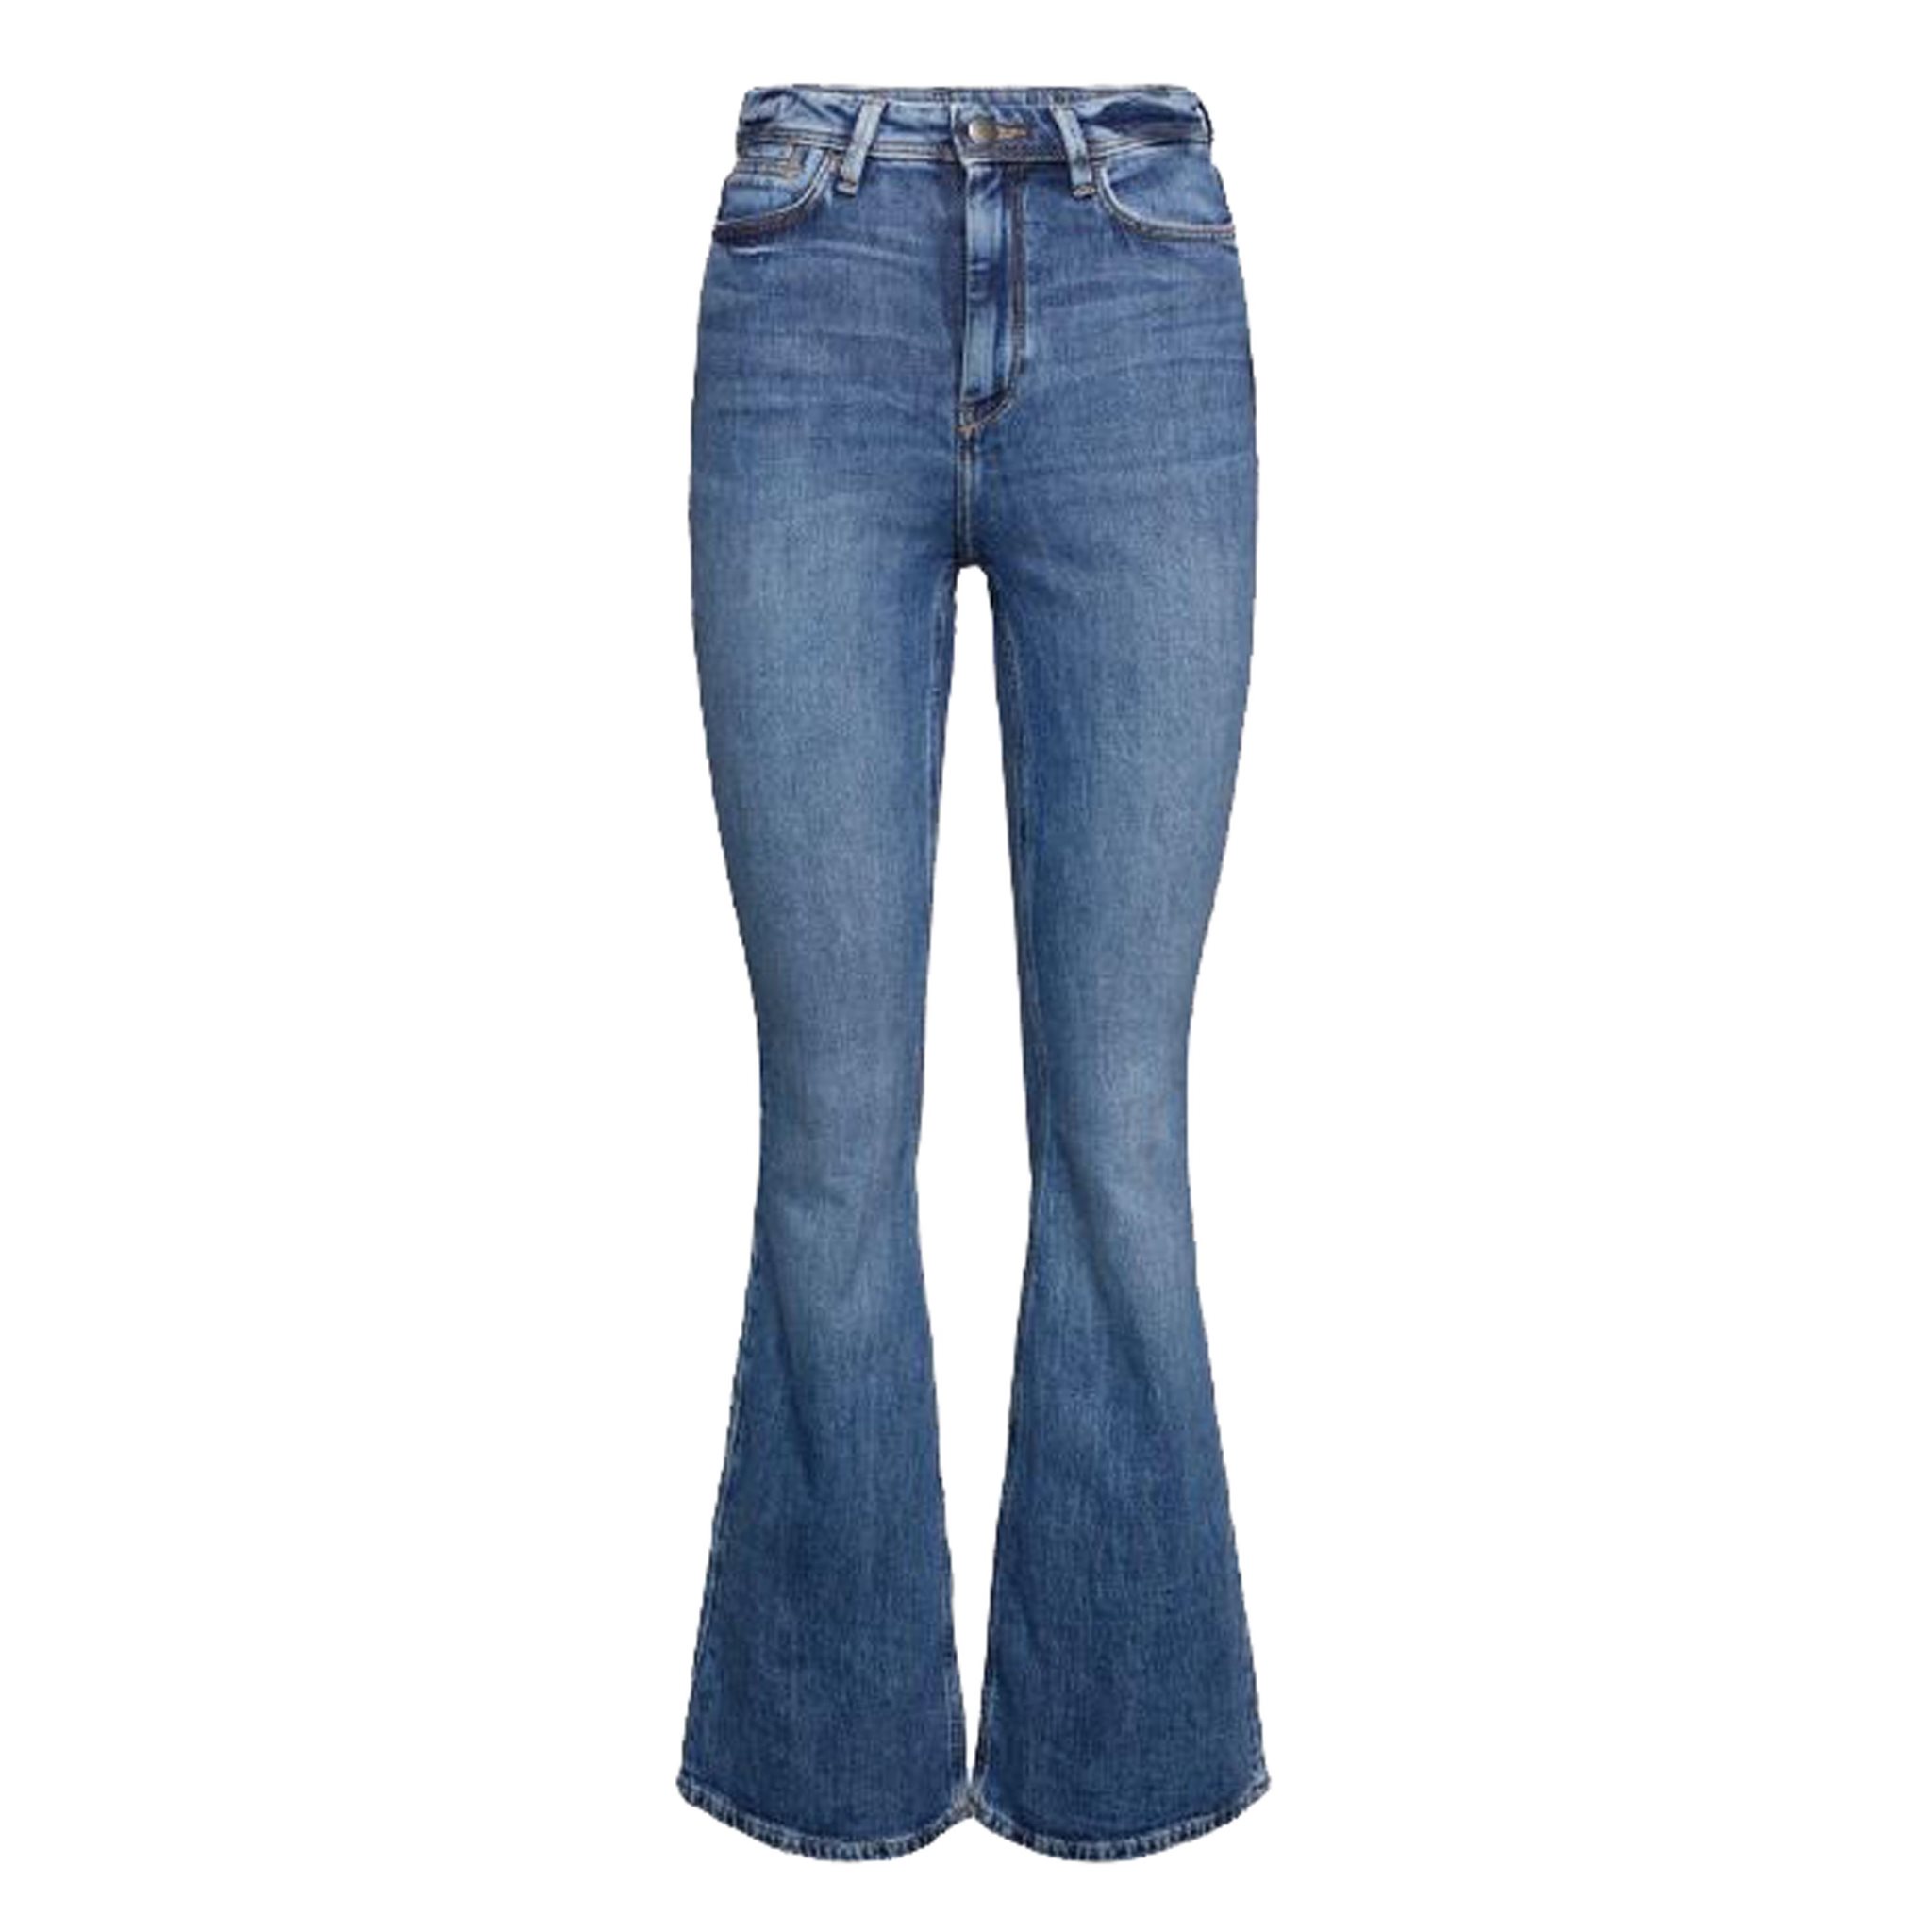 Flared, high-waisted jeans ESPRIT